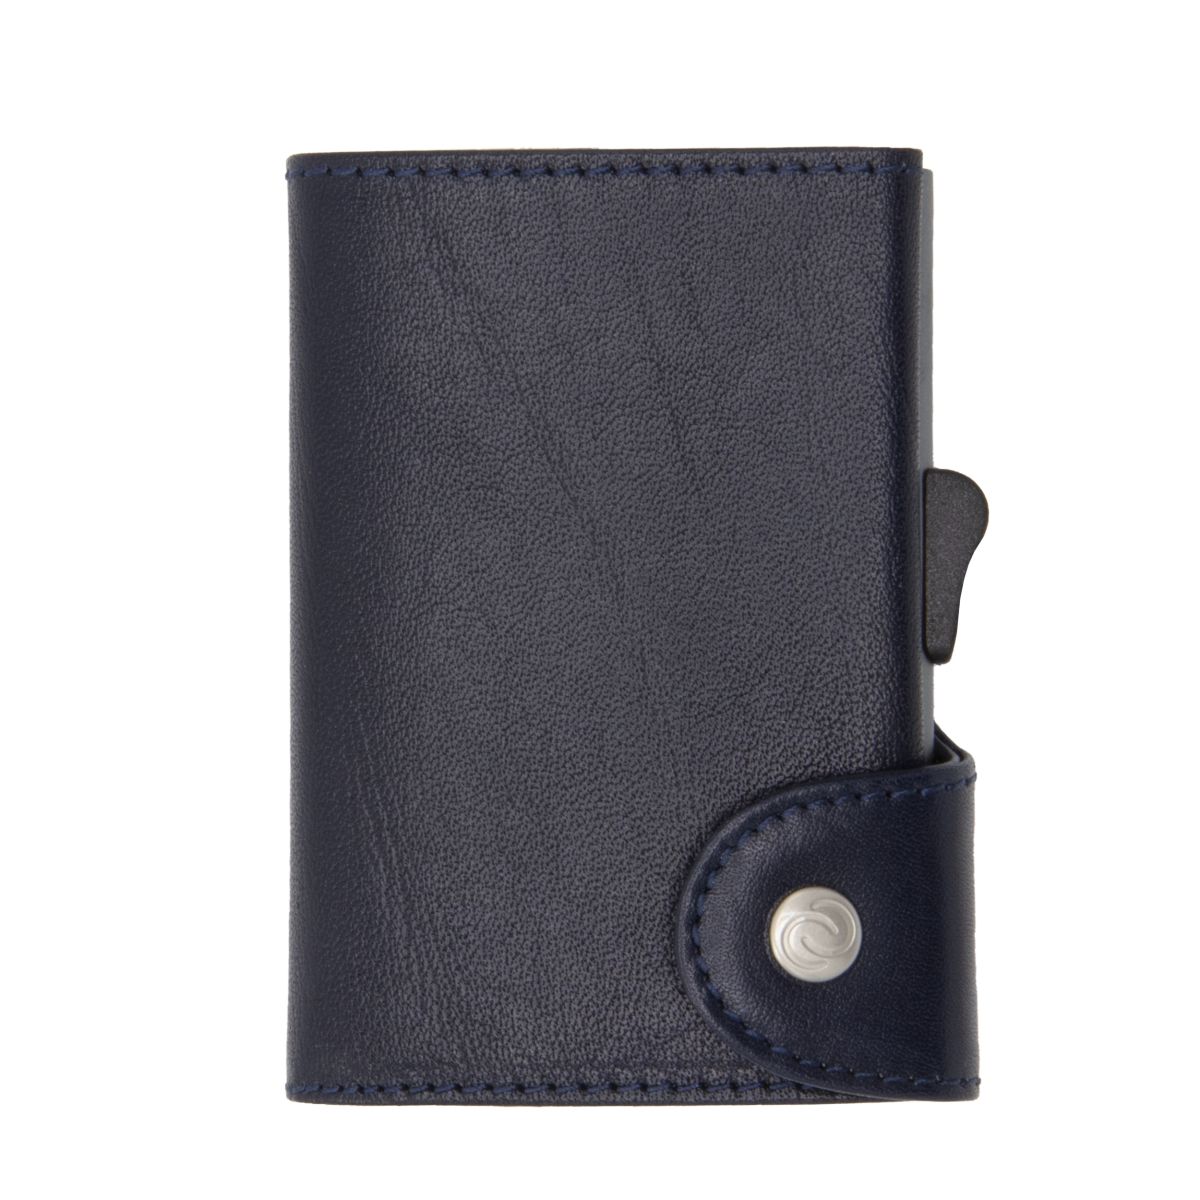 C-Secure XL Aluminum Wallet with Vegetable Genuine Leather - Blue Montana